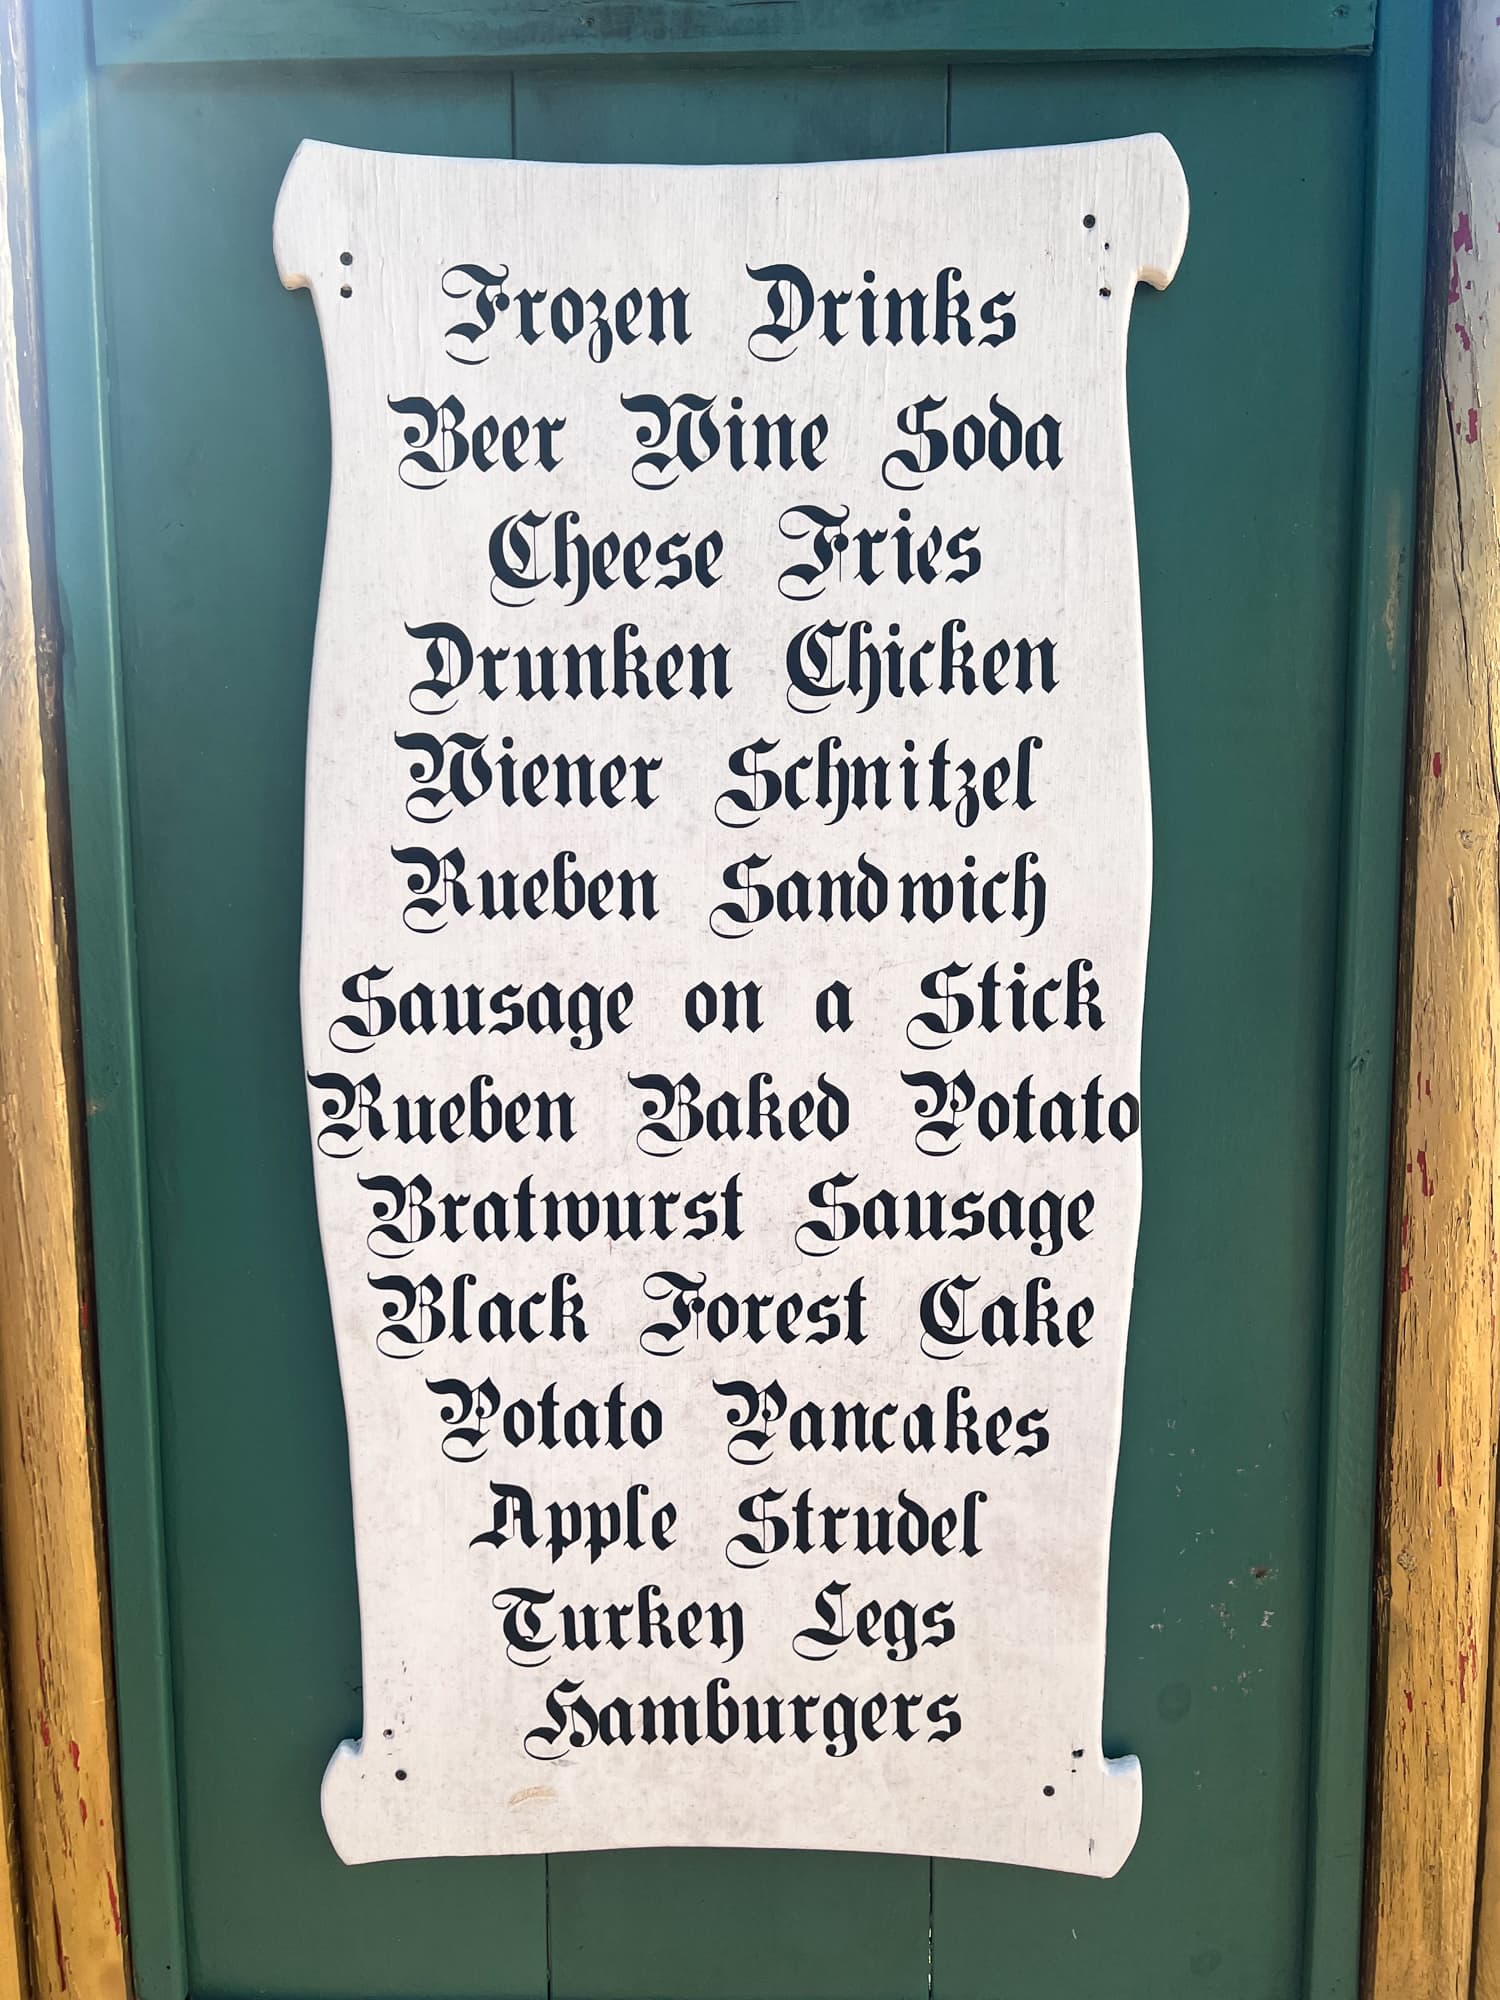 Food and drinks available in Heidelburg